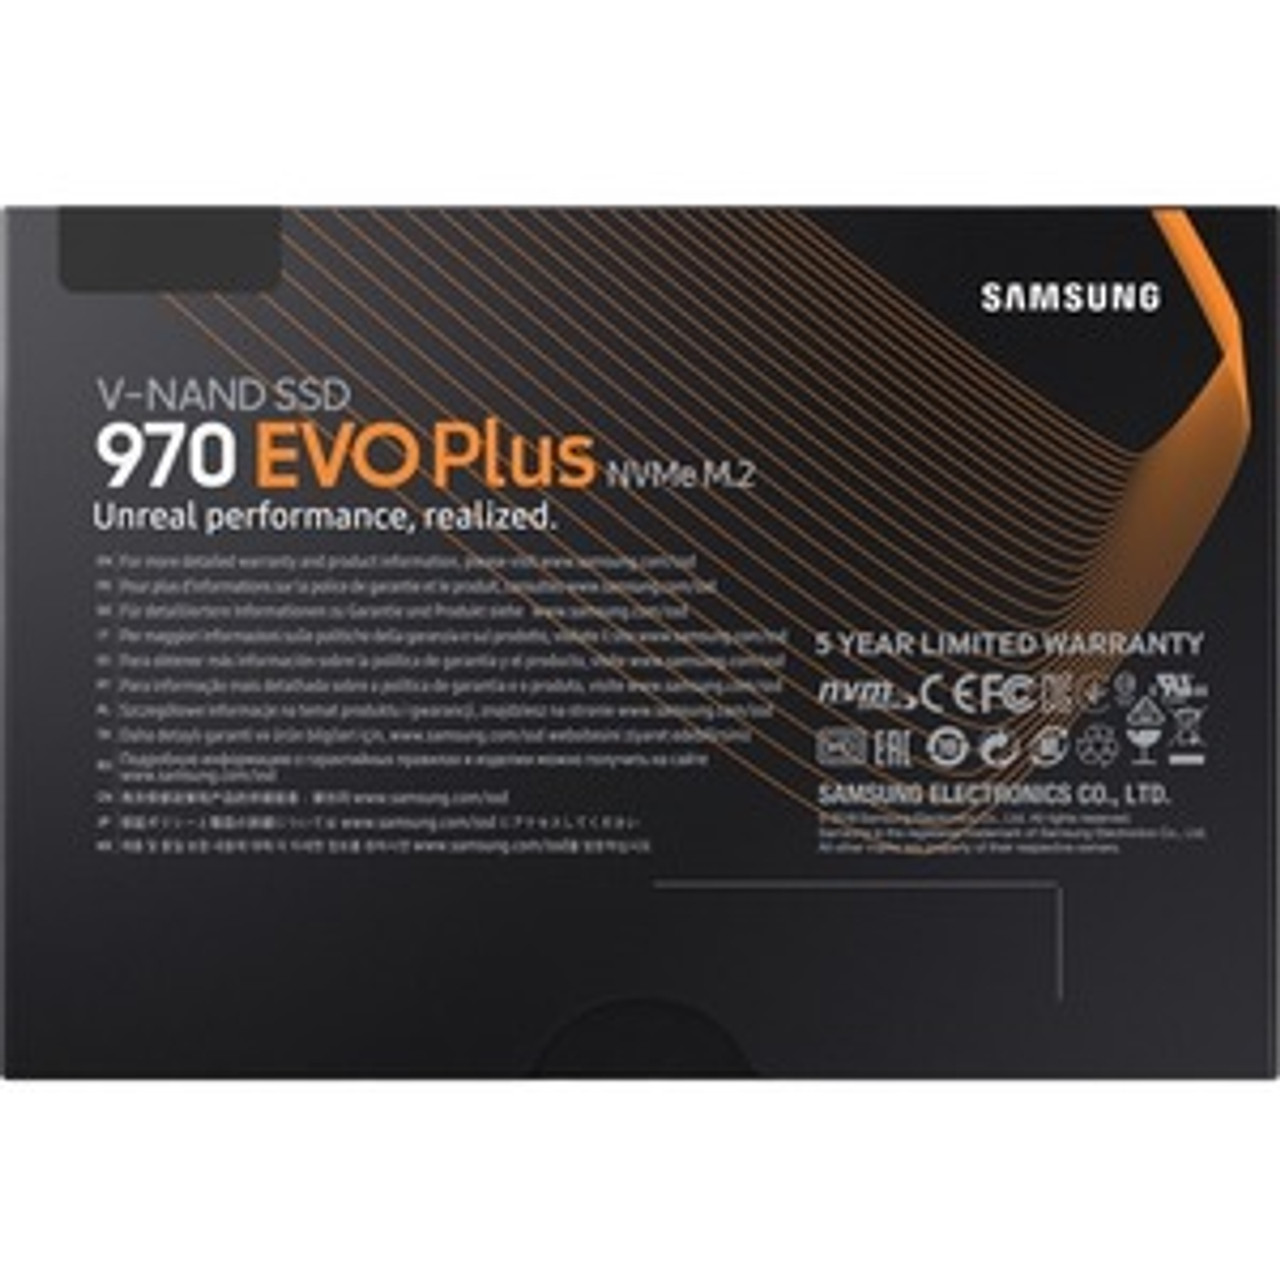 Samsung 970 EVO Plus MZ-V7S500B/AM 500 GB Solid State Drive - M.2 Internal - PCI Express NVMe (PCI Express NVMe 3.0 x4) - Notebook, Desktop PC, Motherboard Device Supported - 300 TB TBW - 3500 MB/s Maximum Read Transfer Rate - 256-bit